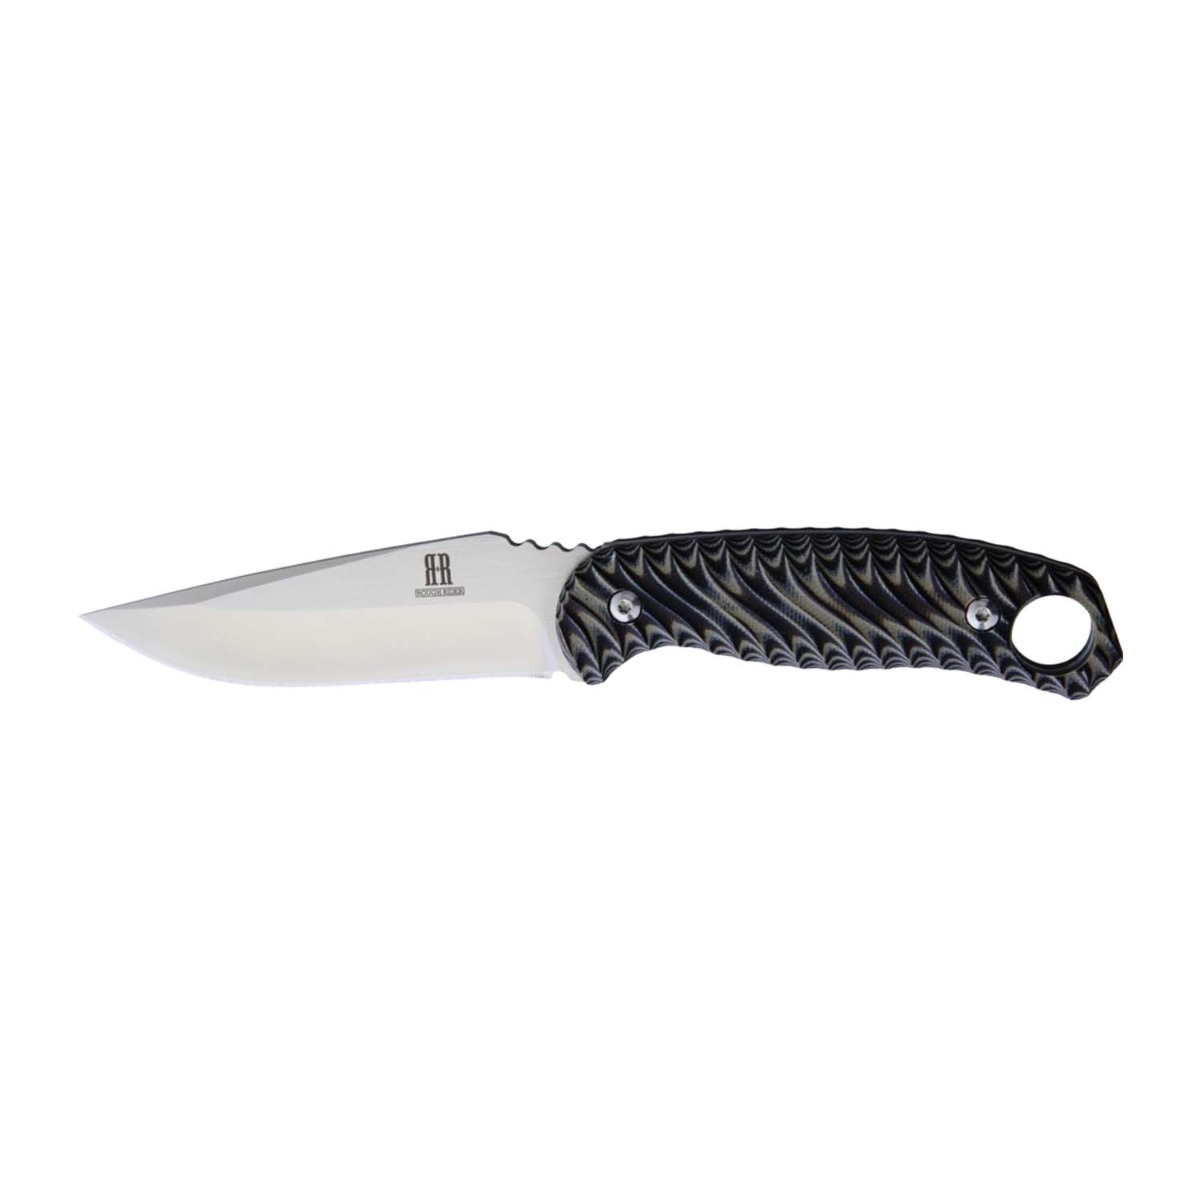  Rough Ryder Fixed Blade Knife 